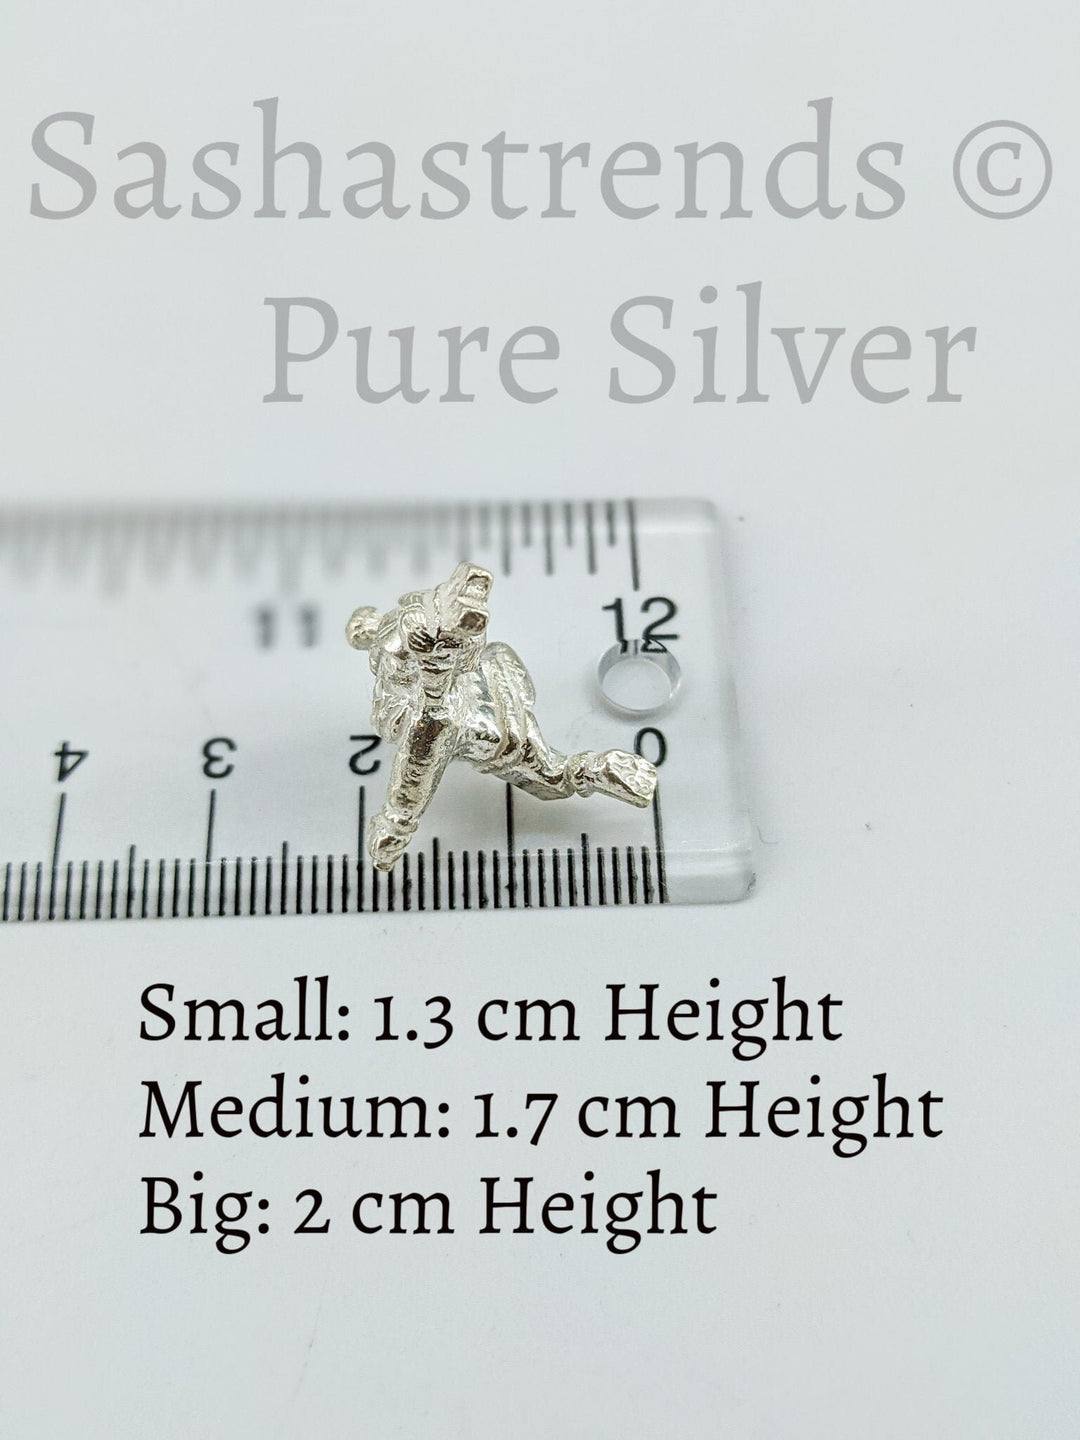 Mini Balakrishna with butter- Silver gift items- Silver Pooja Items for Home, Return Gift for Navarathri, Wedding and Housewarming